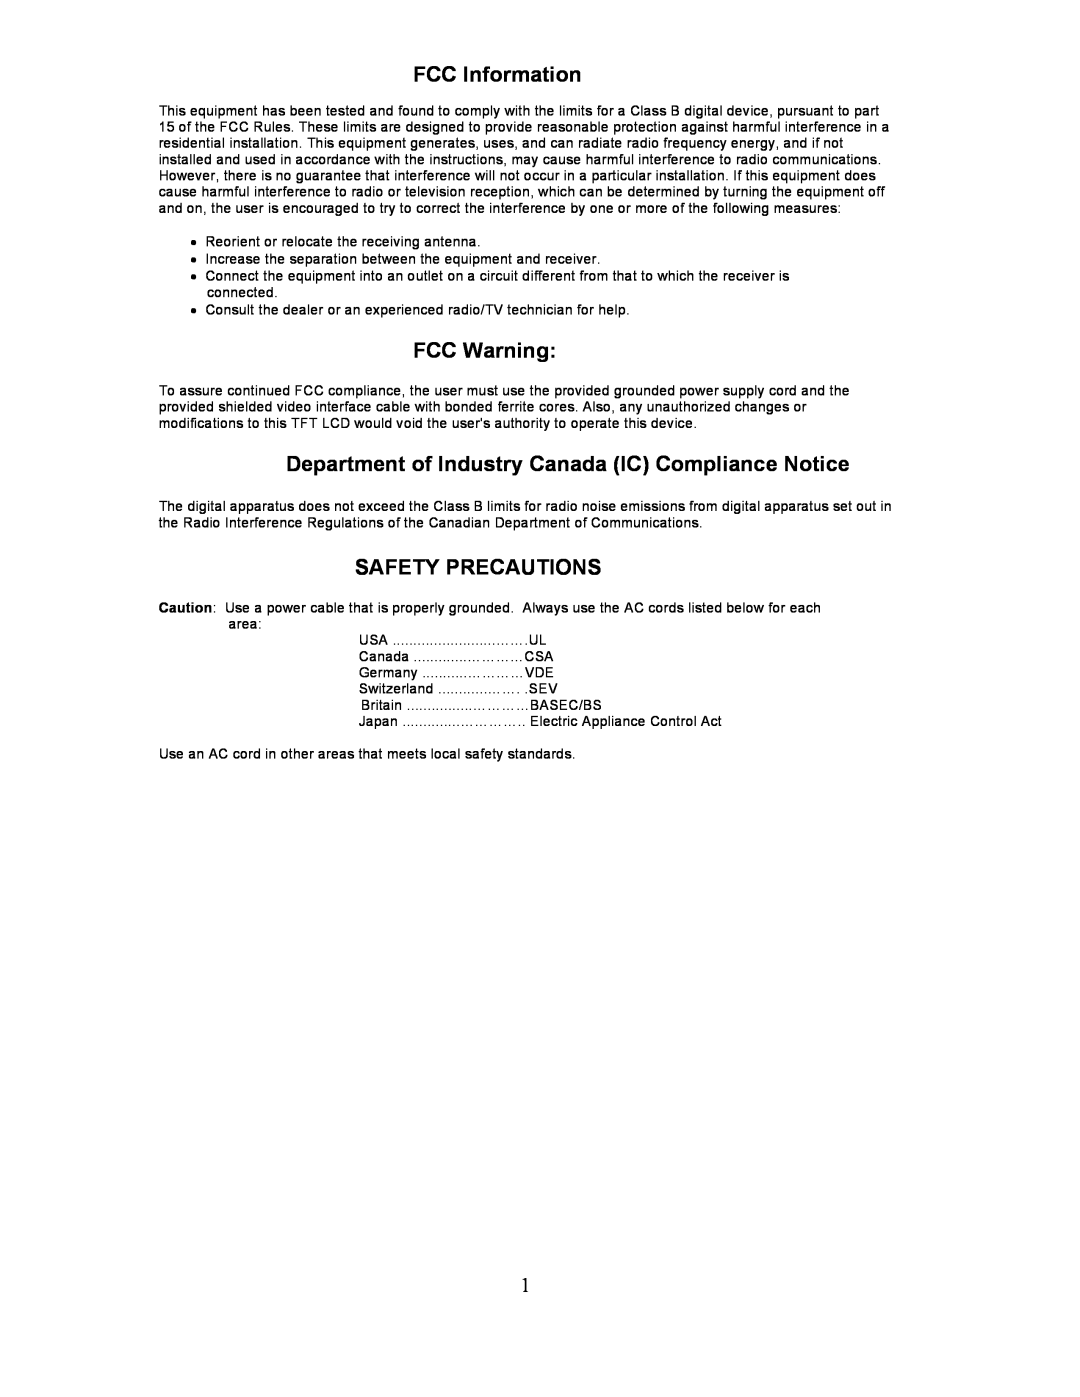 Planar PL201M manual FCC Information, FCC Warning, Department of Industry Canada IC Compliance Notice, Safety Precautions 